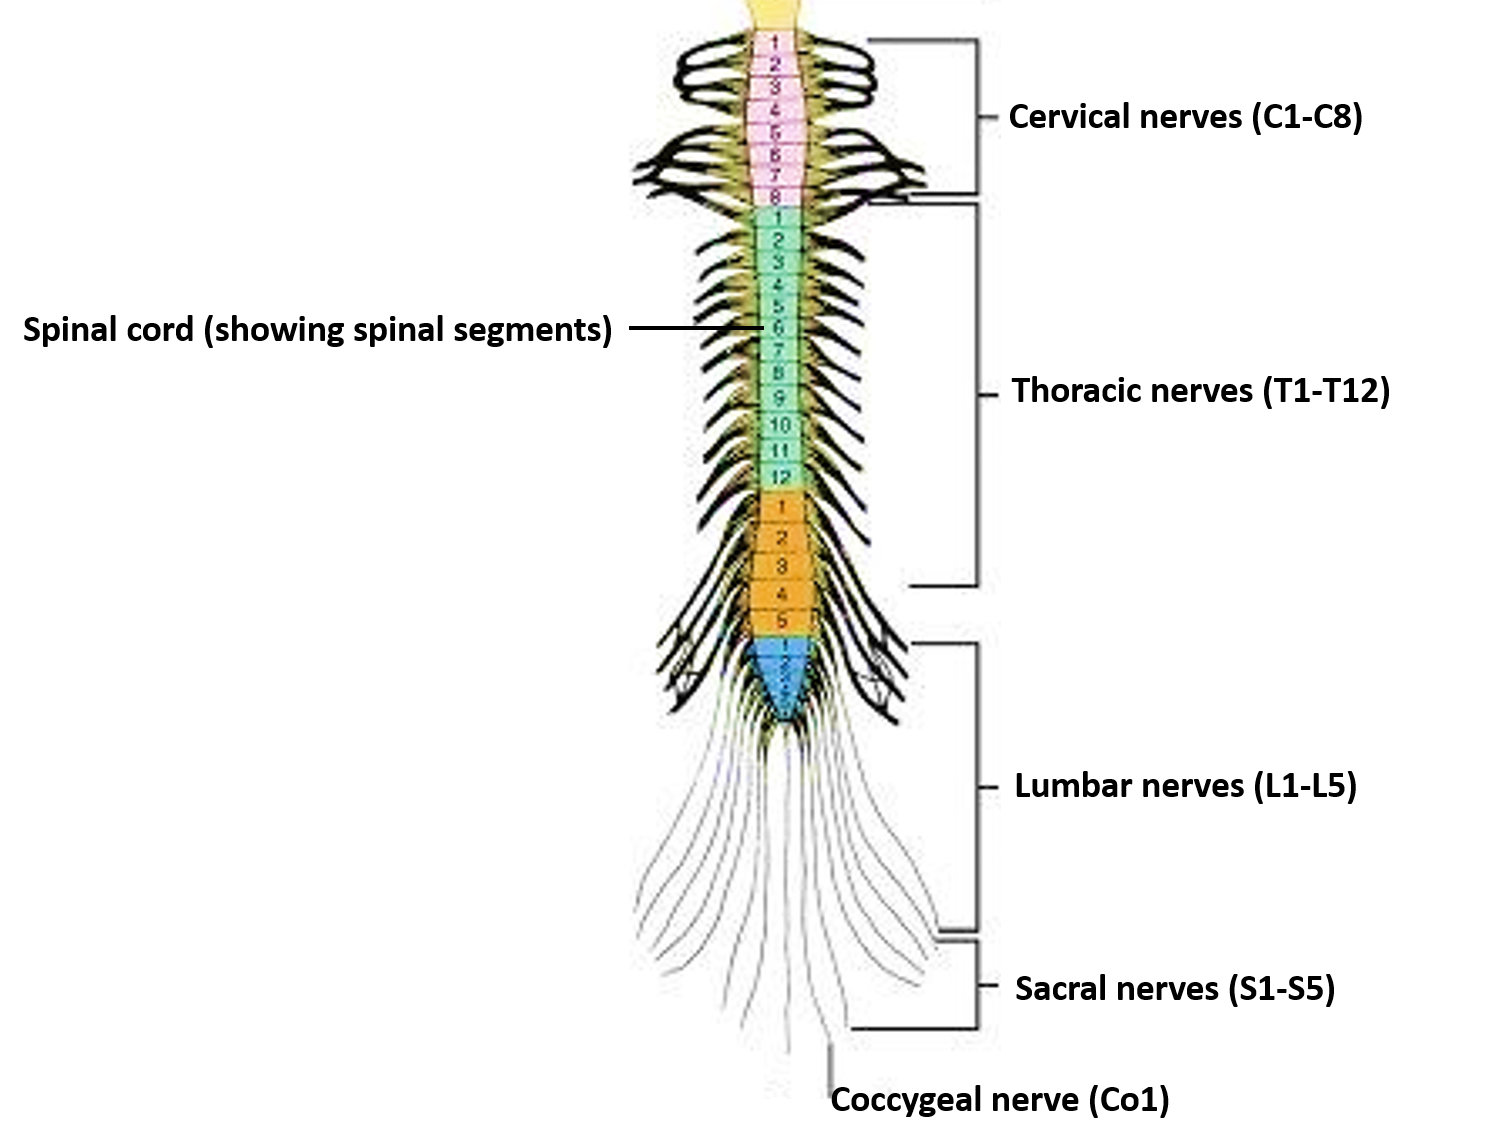 31 pairs of spinal nerves